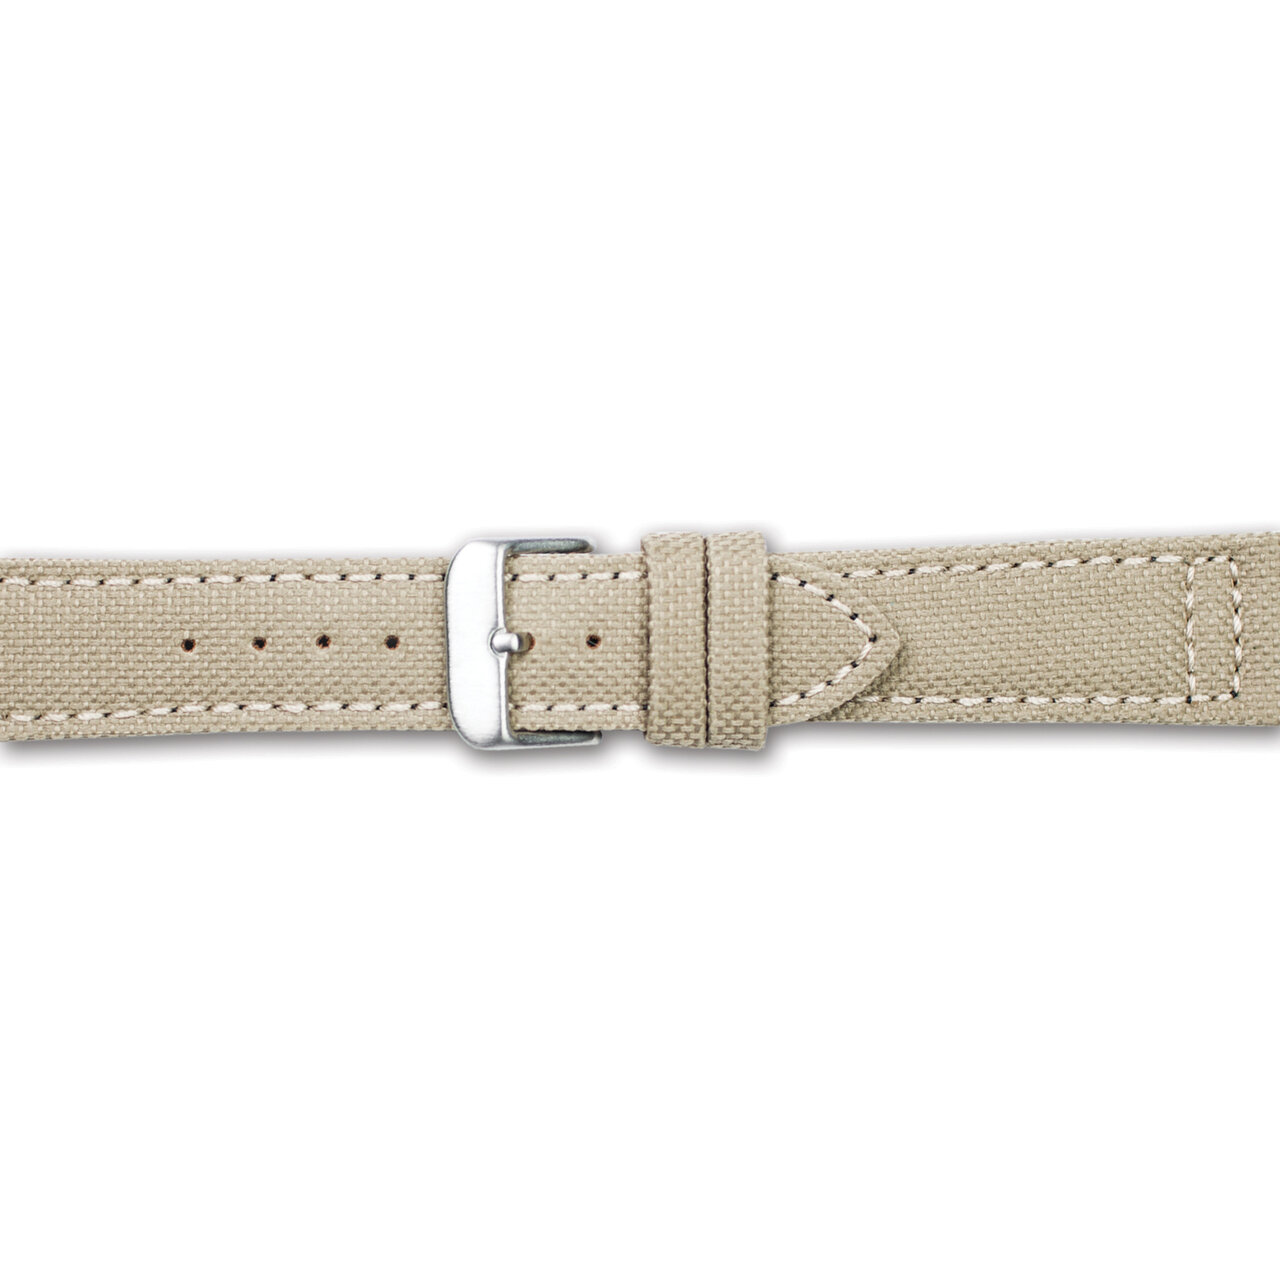 22mm Tan Canvas Leather Lining Silver-tone Buckle Watch Band BAW388-22